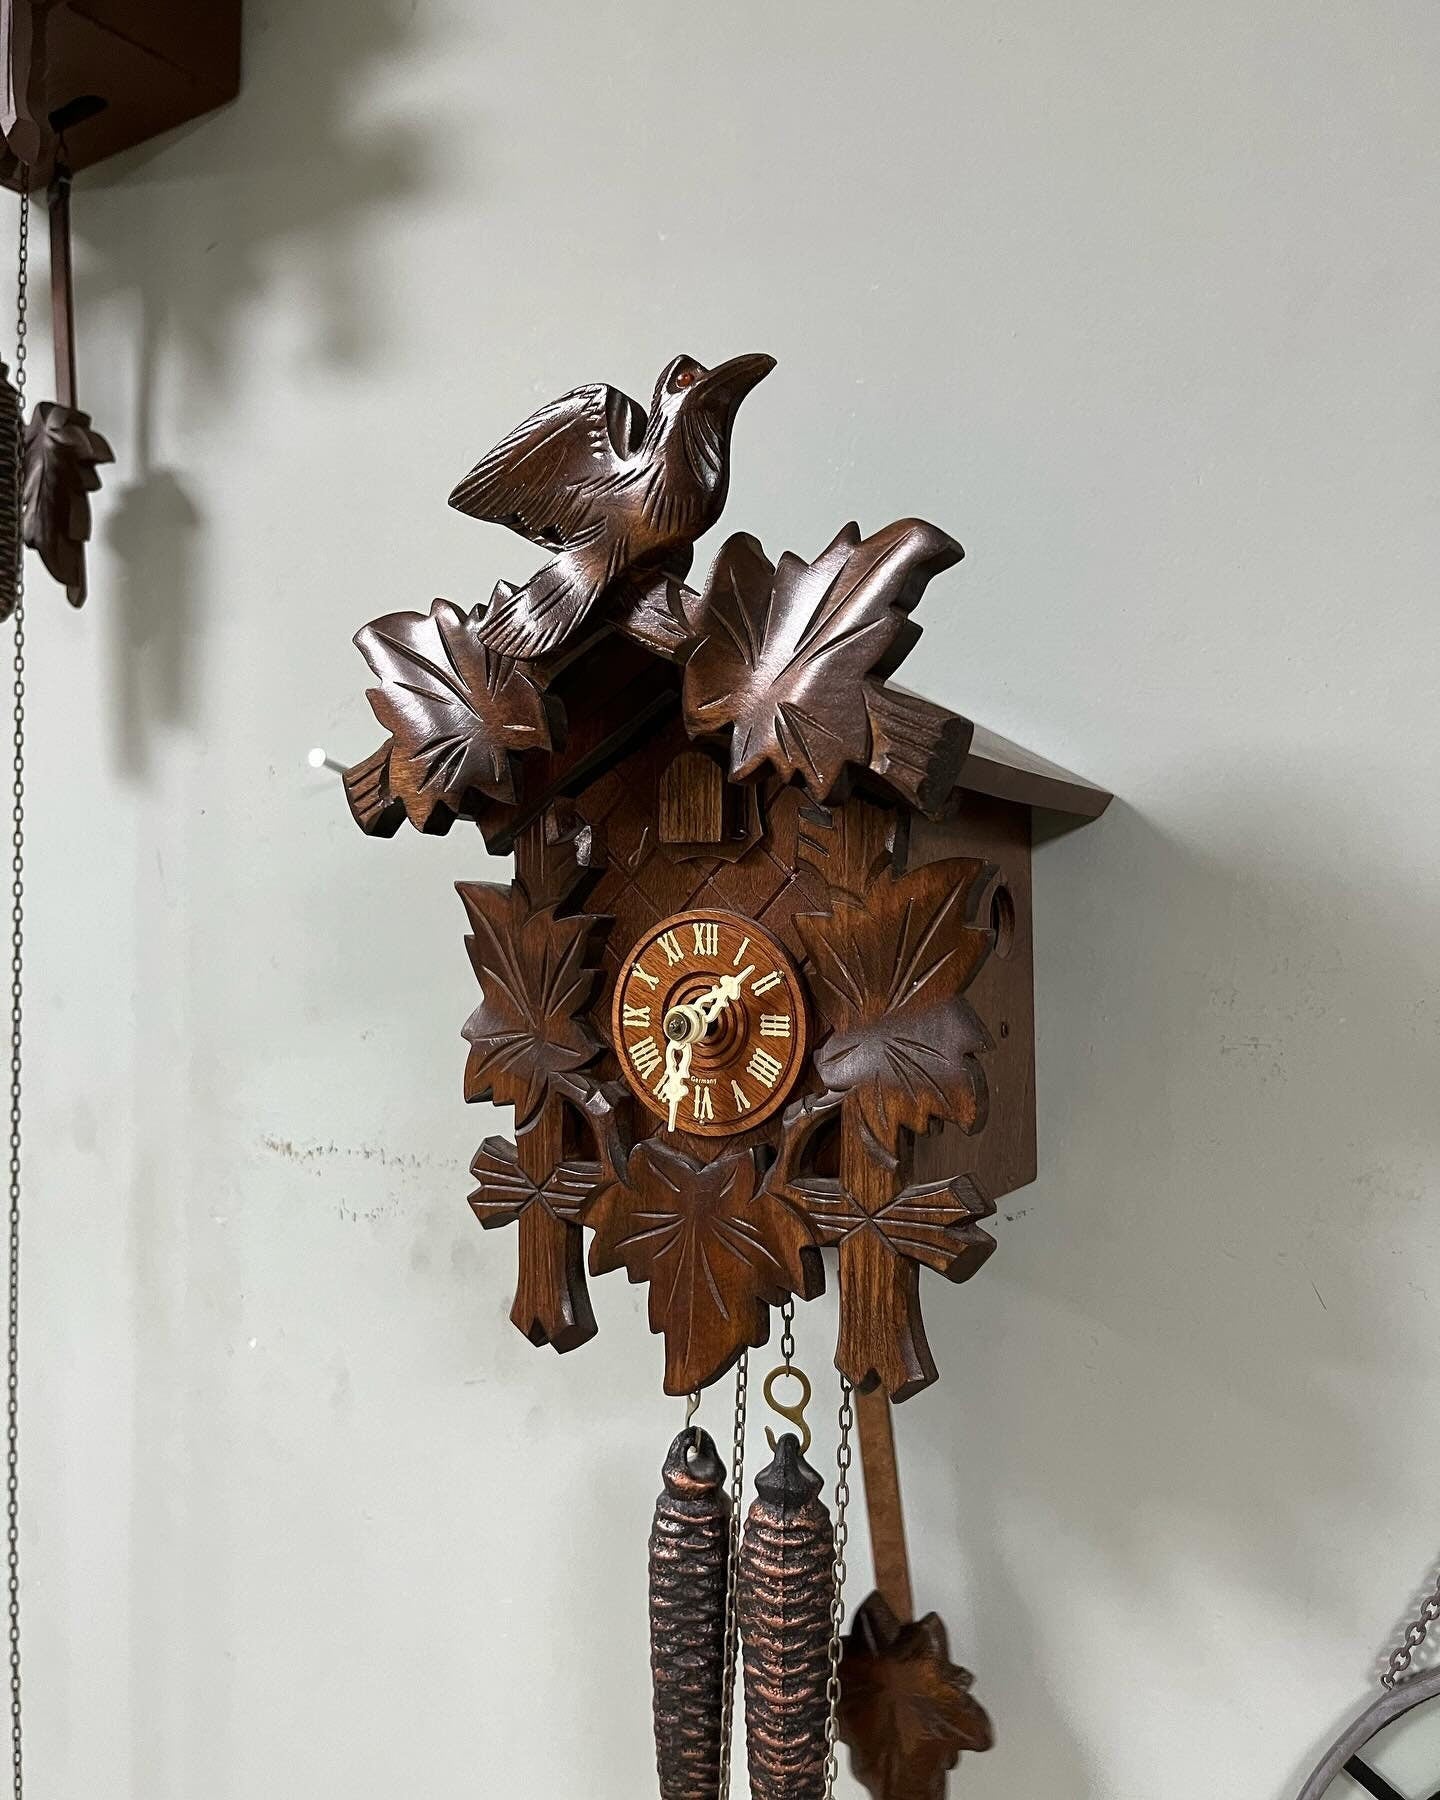 Antique Cuckoo Clock with Wind-Up Mechanism and Wooden Case | 22x17 cm | Collectible Vintage Timepiece